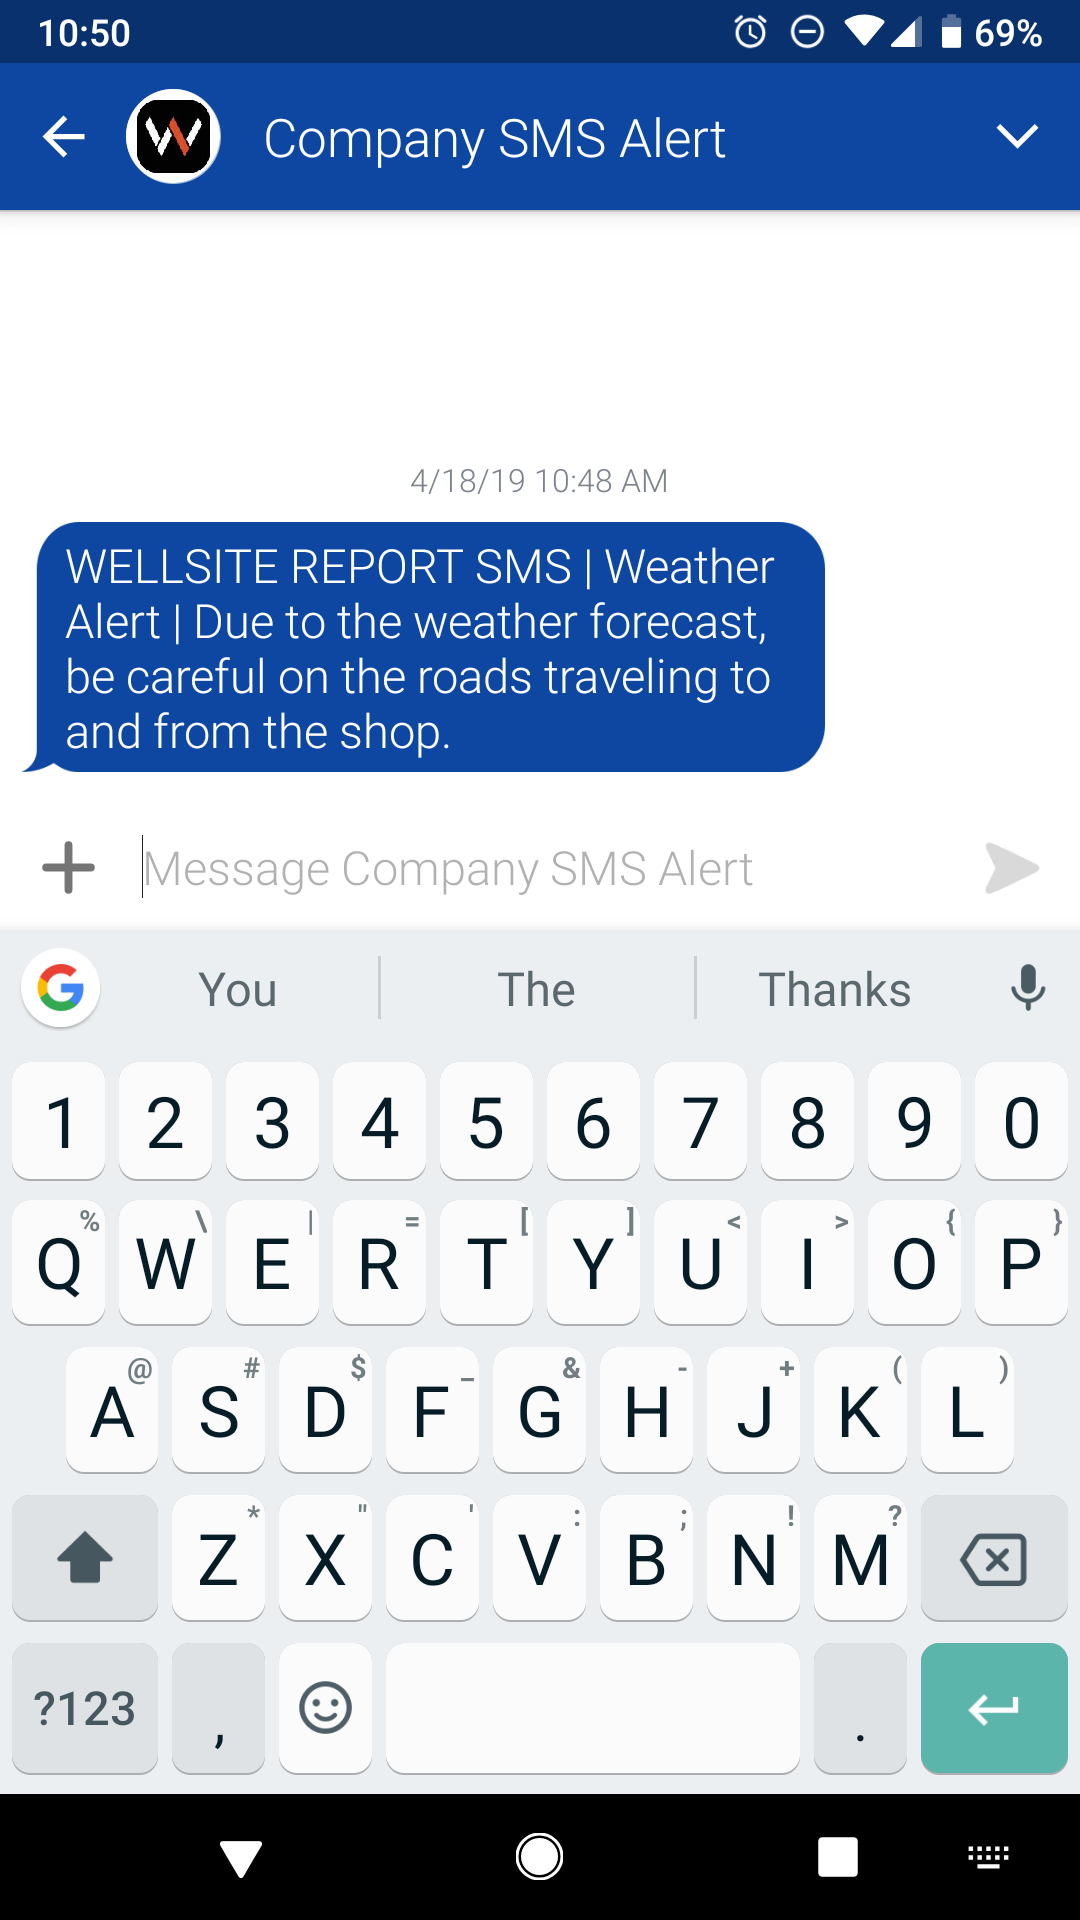 SMS received by employees